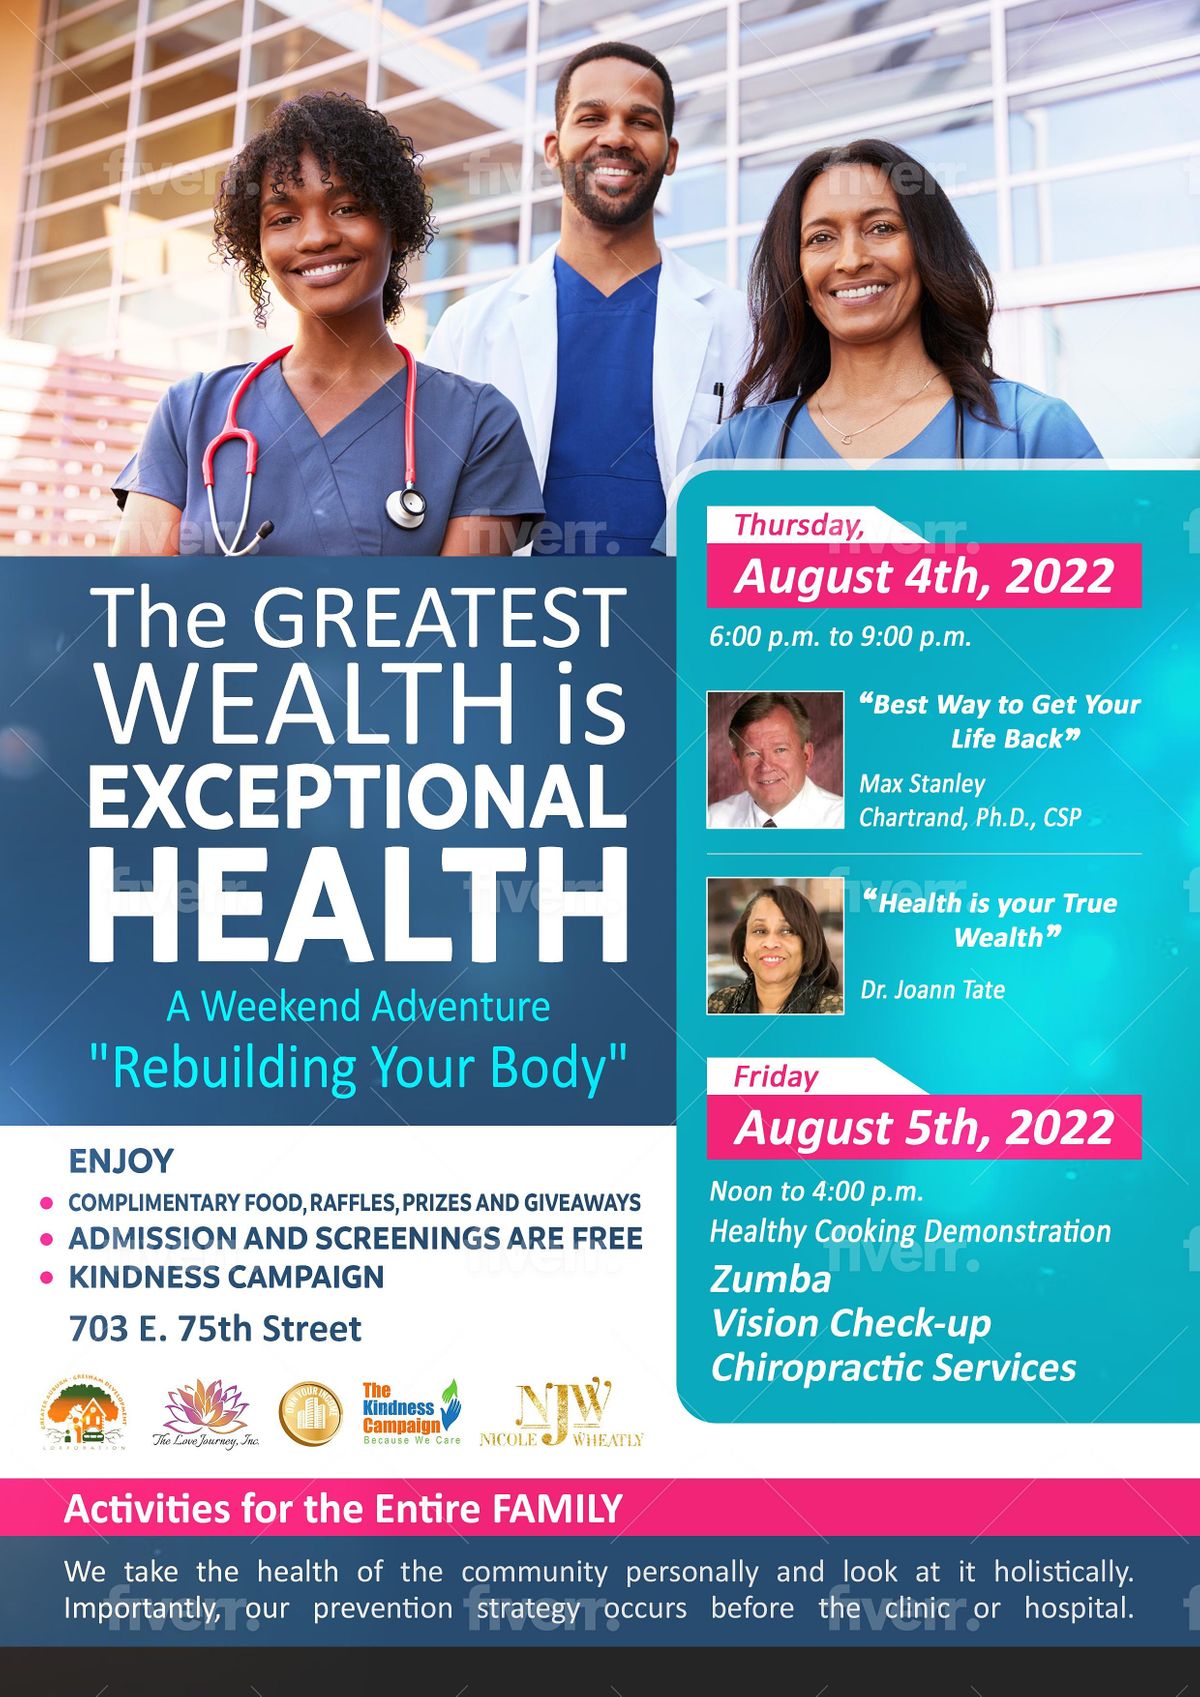 THE GREATEST WEALTH IS EXCEPTIONAL HEALTH "REBUILD YOUR BODY"